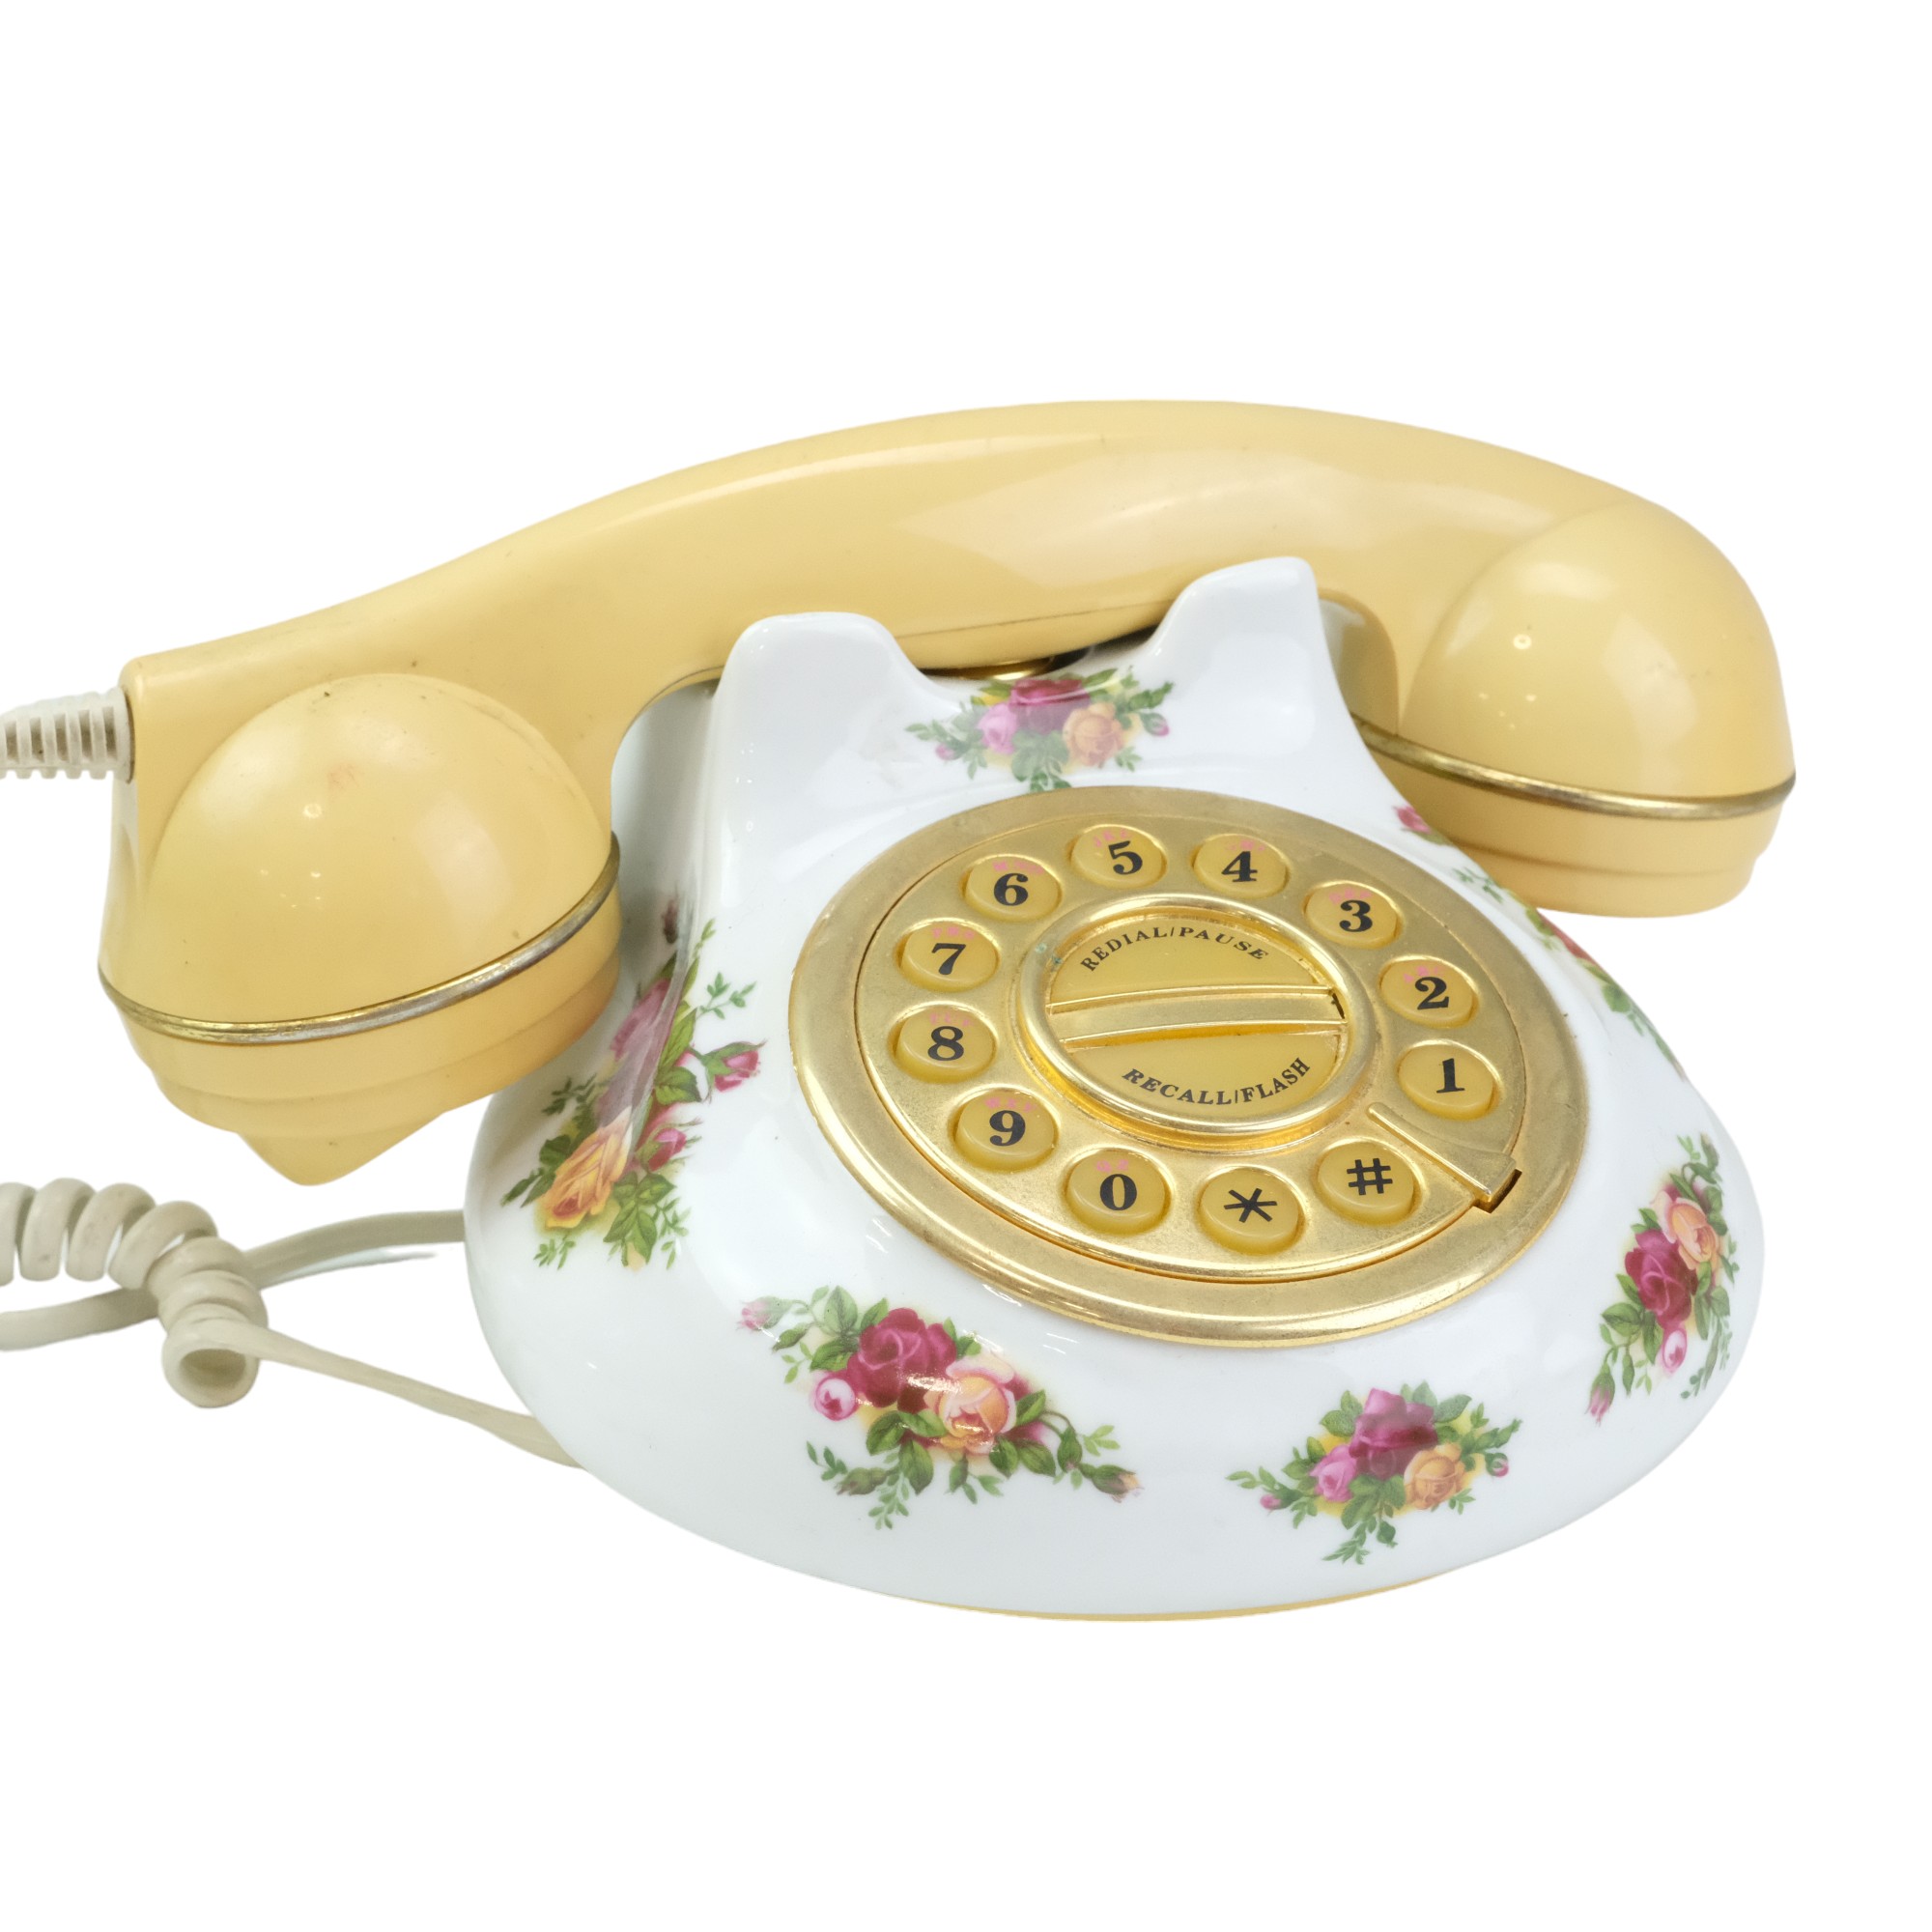 A 1970s GPO 746 Bakelite rotary dial telephone together with a 1962 Royal Albert Old Country Roses - Image 3 of 3